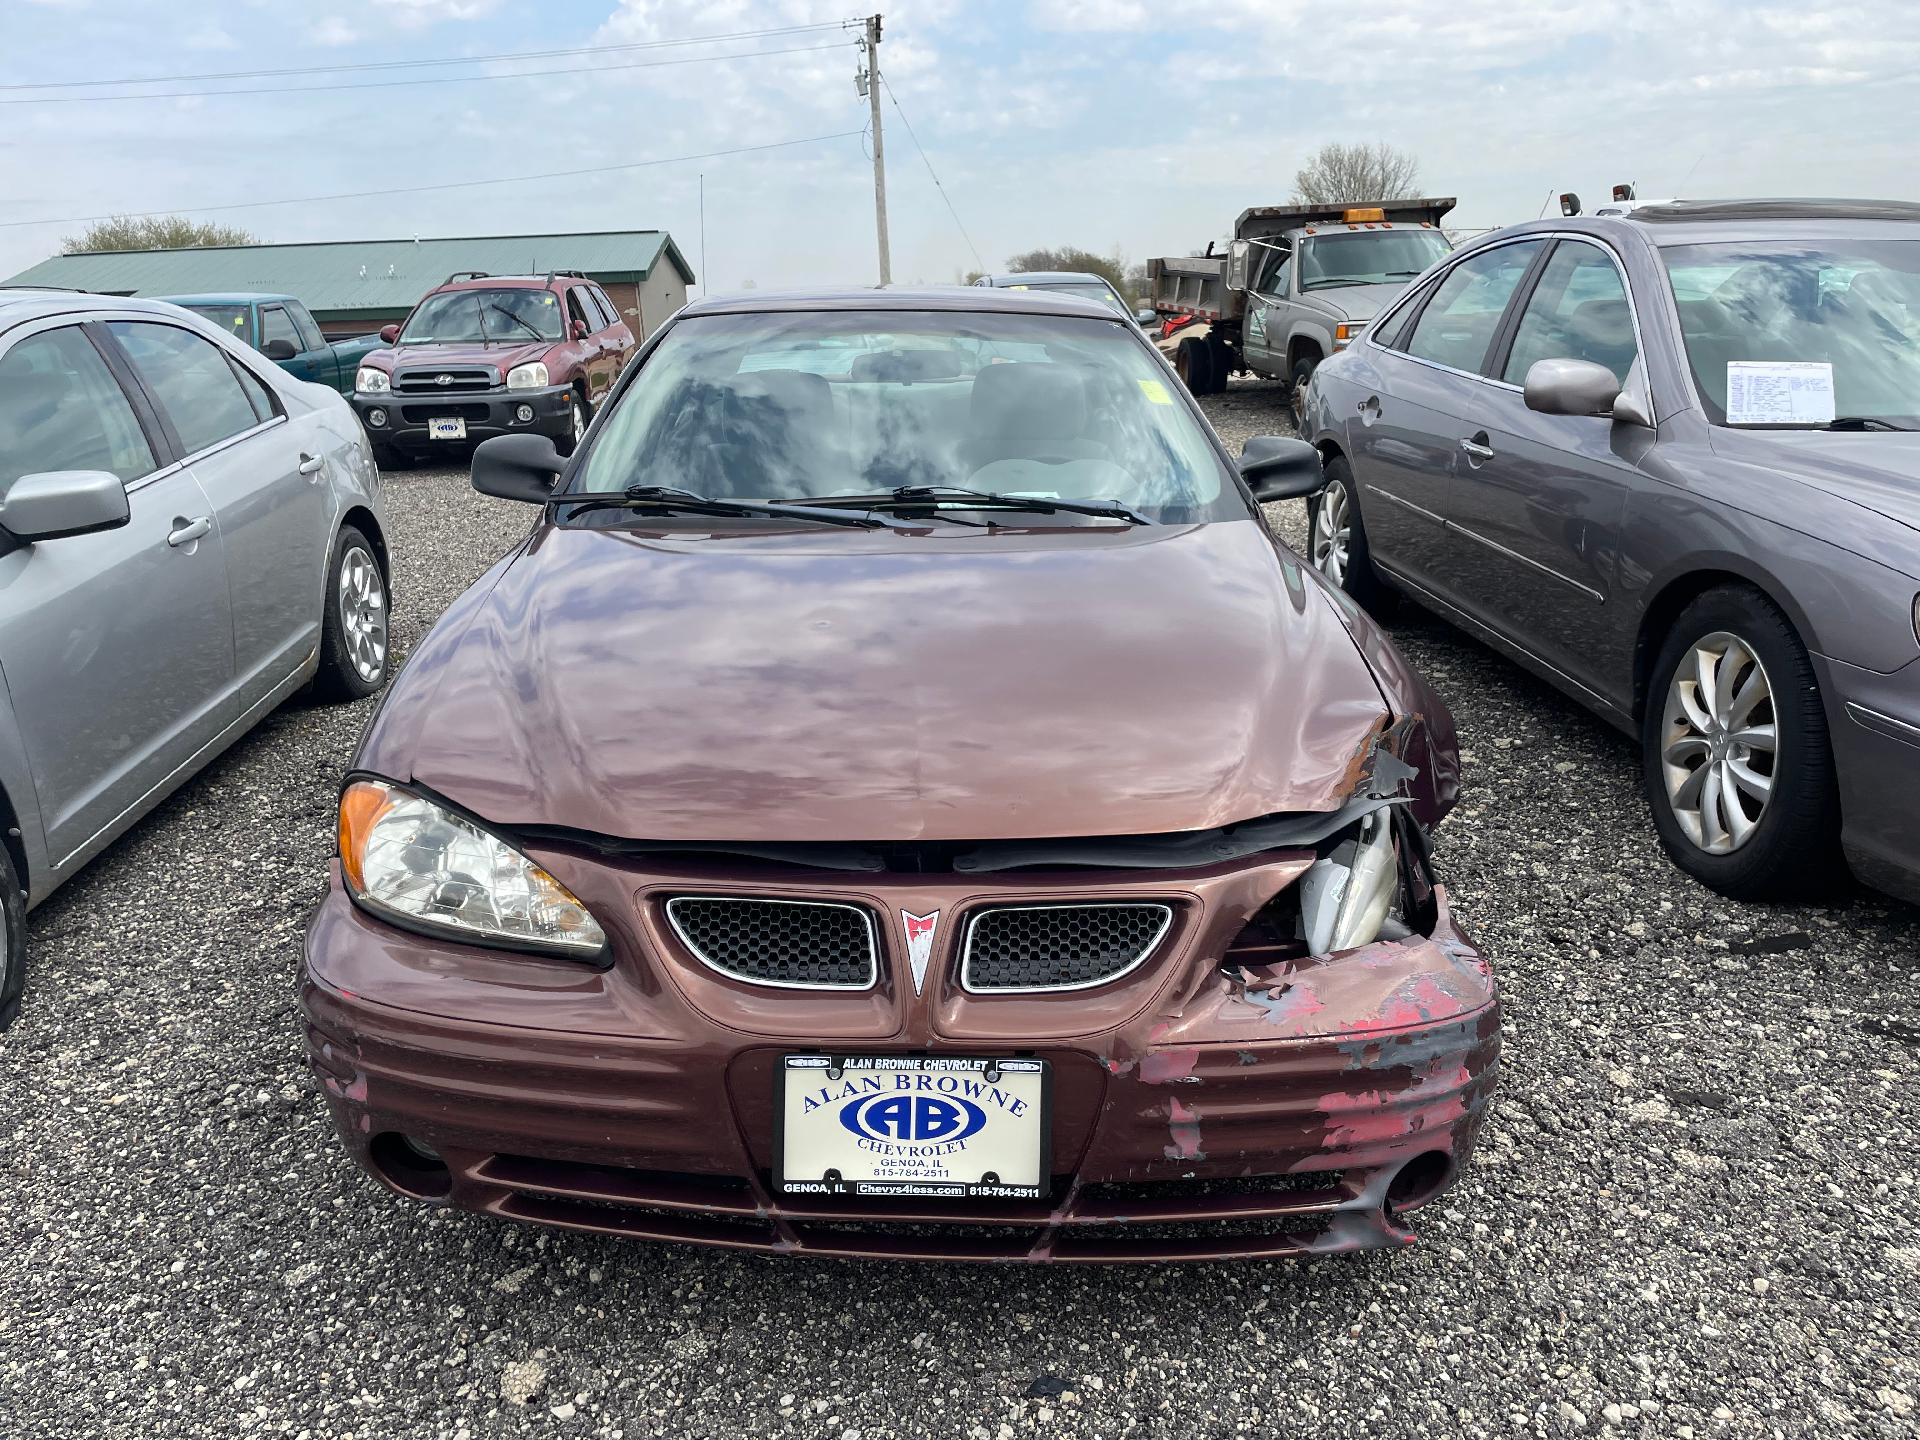 Used 2000 Pontiac Grand Am SE1 with VIN 1G2NF52E0YC526282 for sale in Genoa, IL